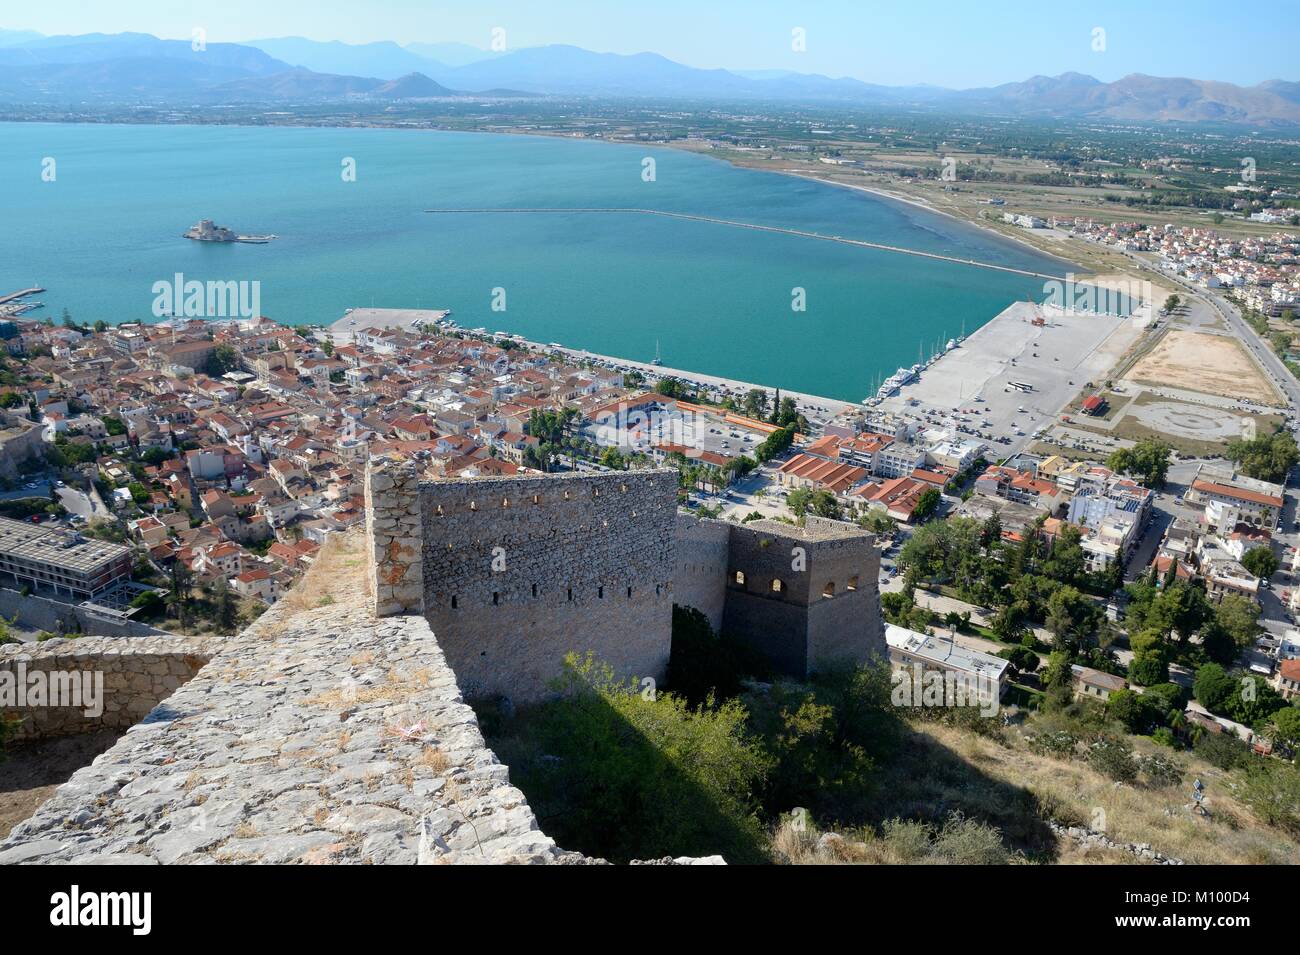 Overview of Nafplio town, harbour and the Bay of Nafplio, from Palamidi castle, Argolis, Peloponnese, Greece, August. Stock Photo